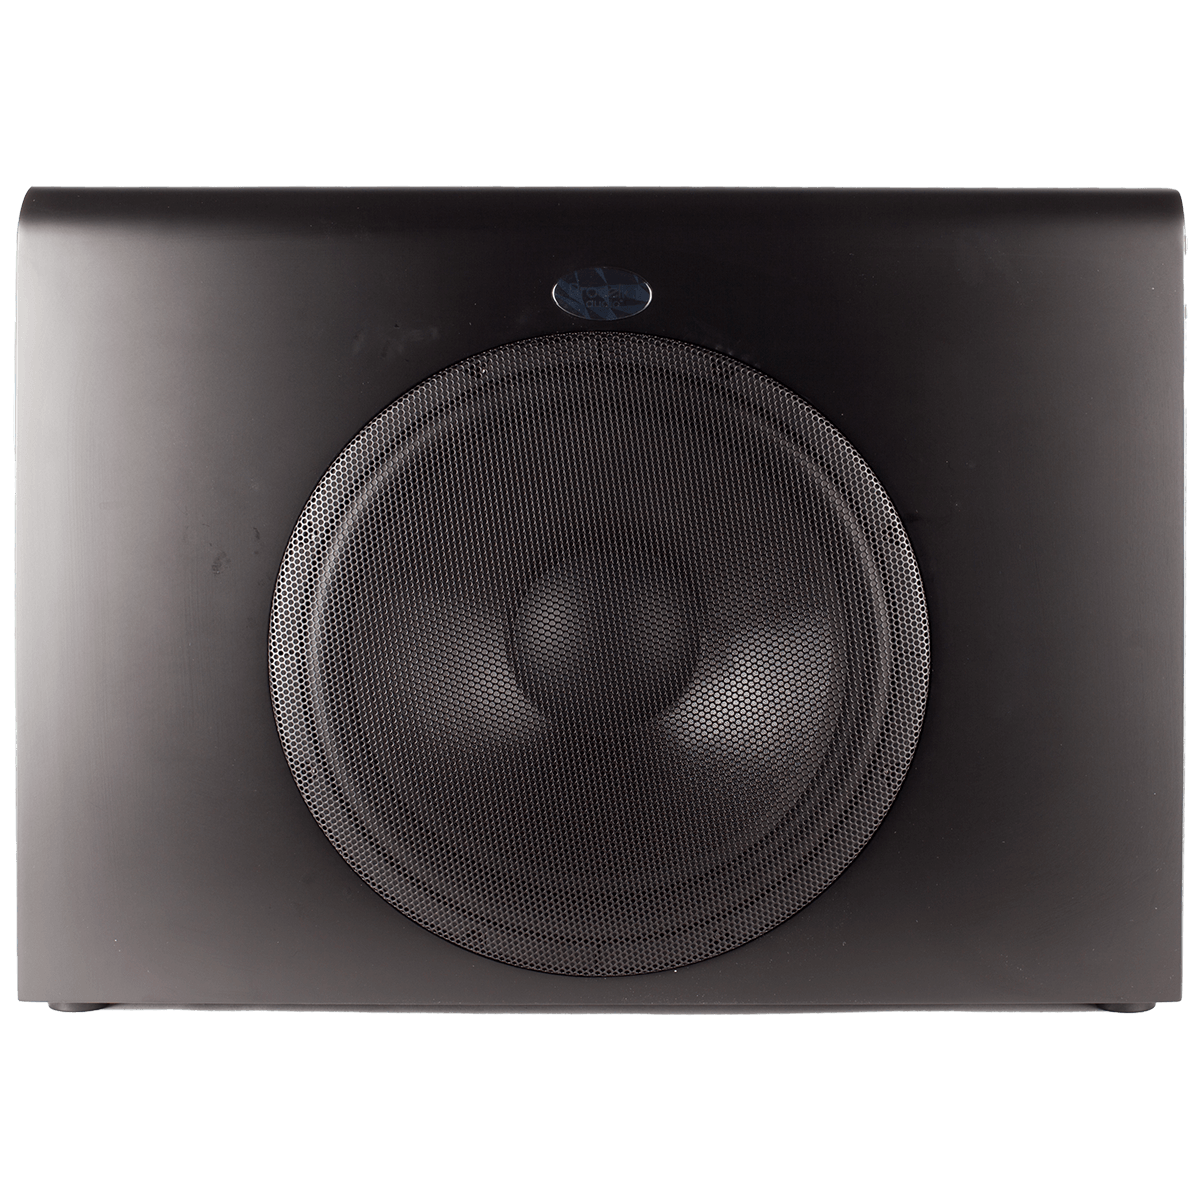 Procella P15A powered subwoofer